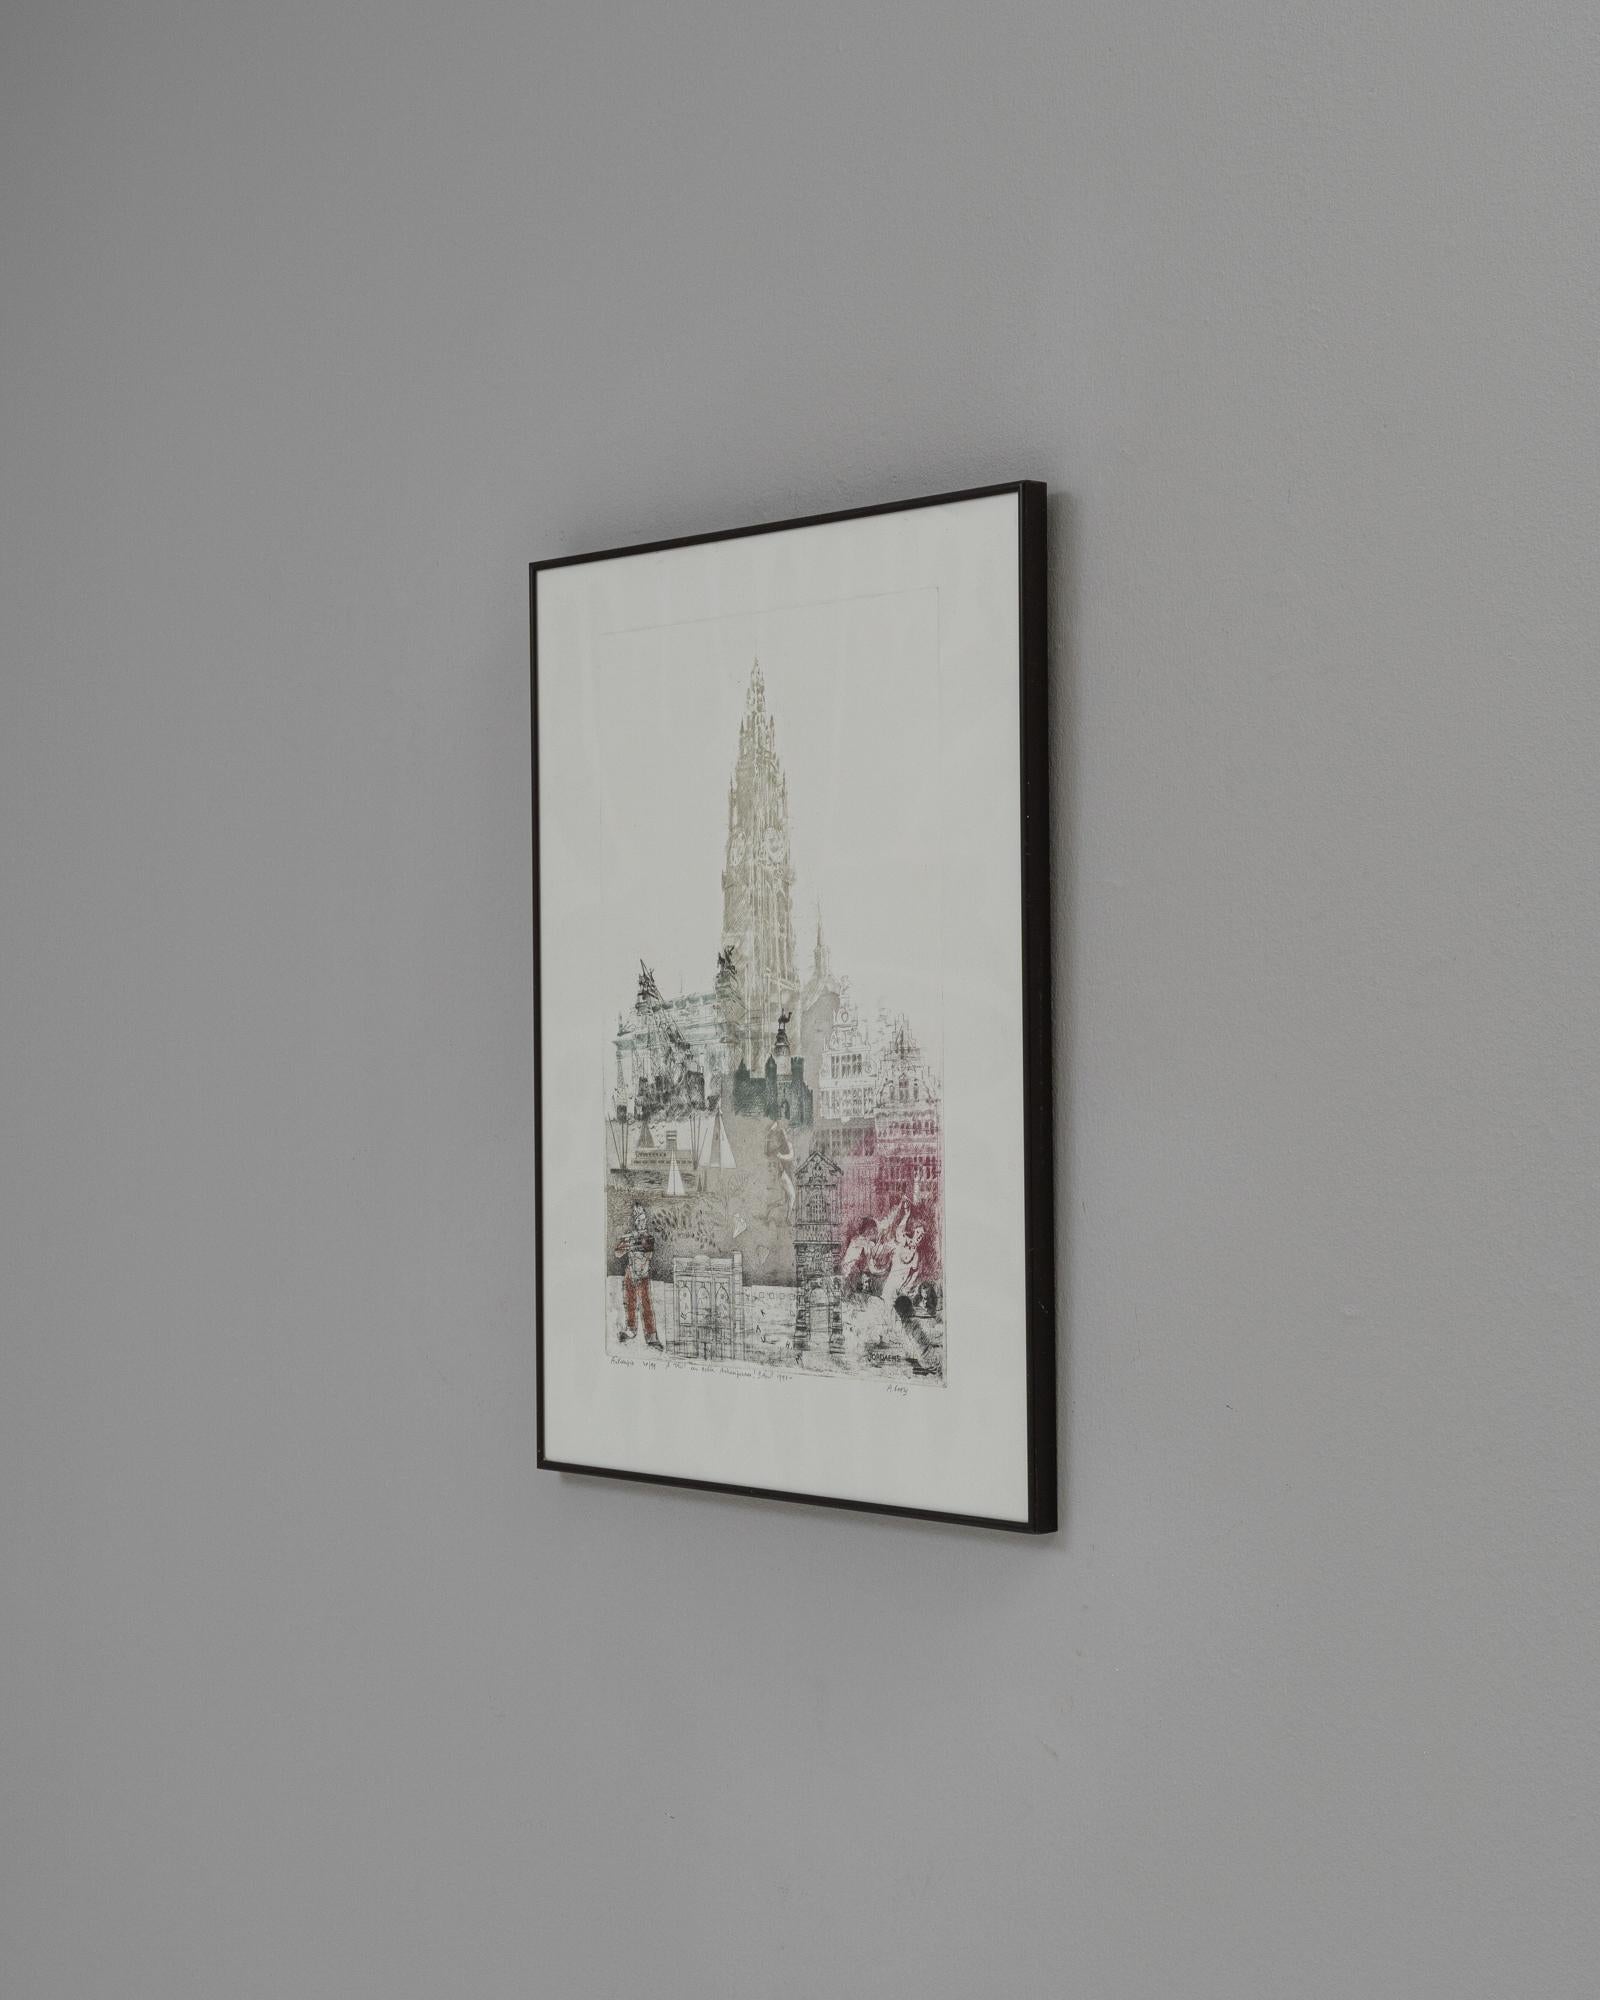 This 20th-century Belgian artwork captures the viewer with its intricate blend of architectural detailing and abstract elements, framed exquisitely within a sleek wooden border. The piece showcases a stunning cathedral, its spire soaring towards the